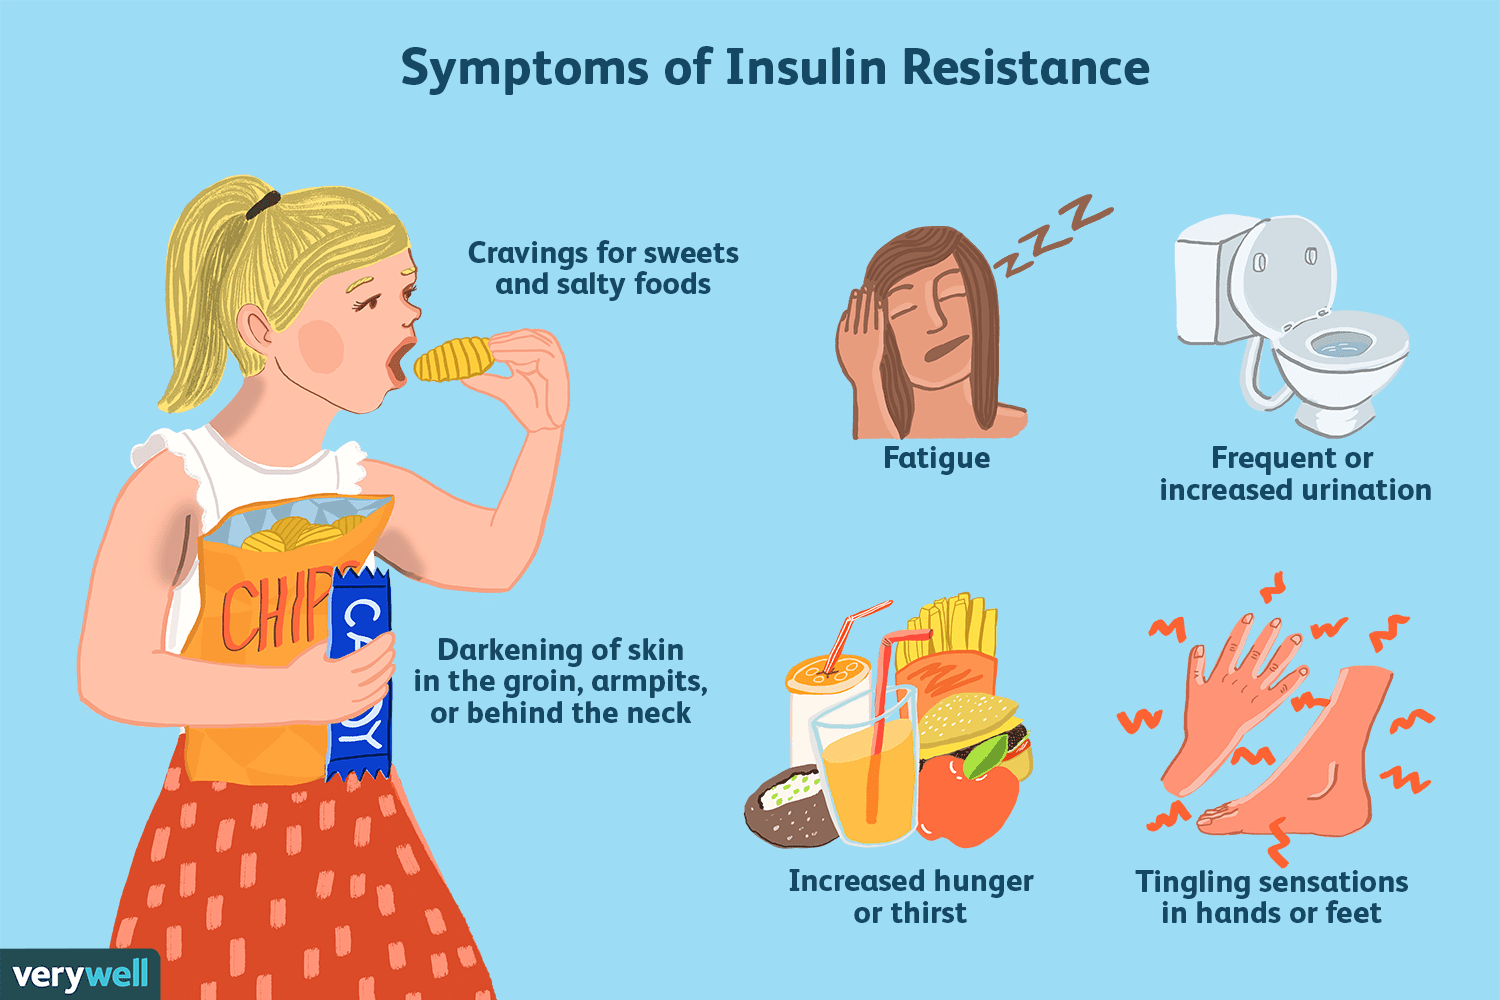 Diagnosing Insulin Resistance in Women With PCOS